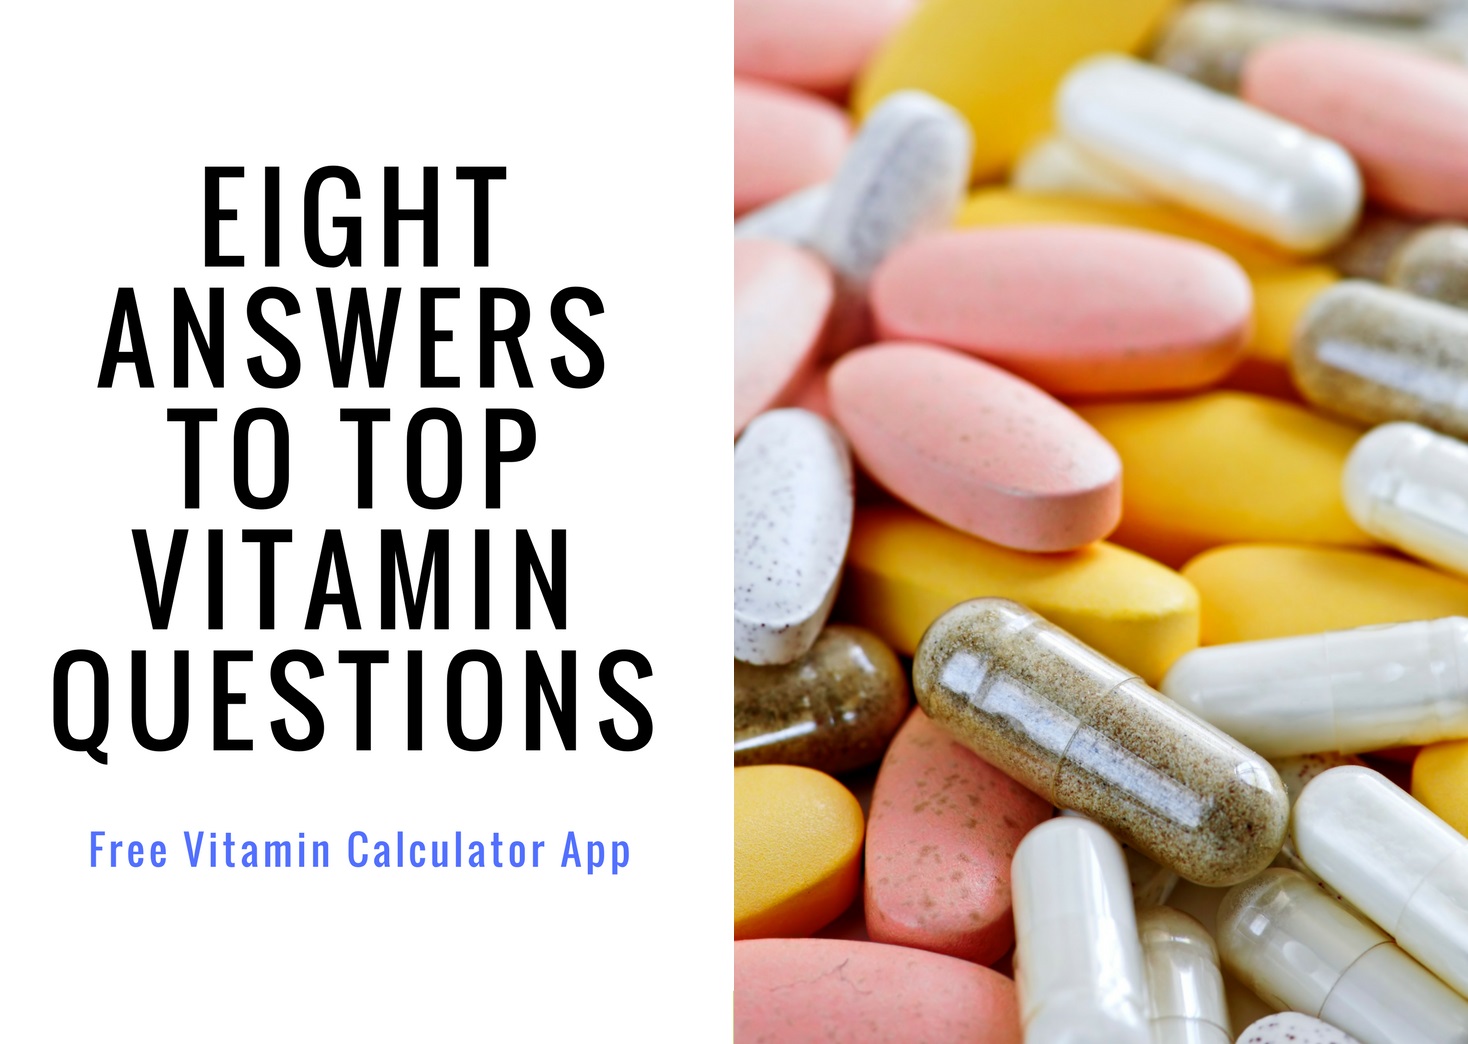 8 answers to top vitamin questions